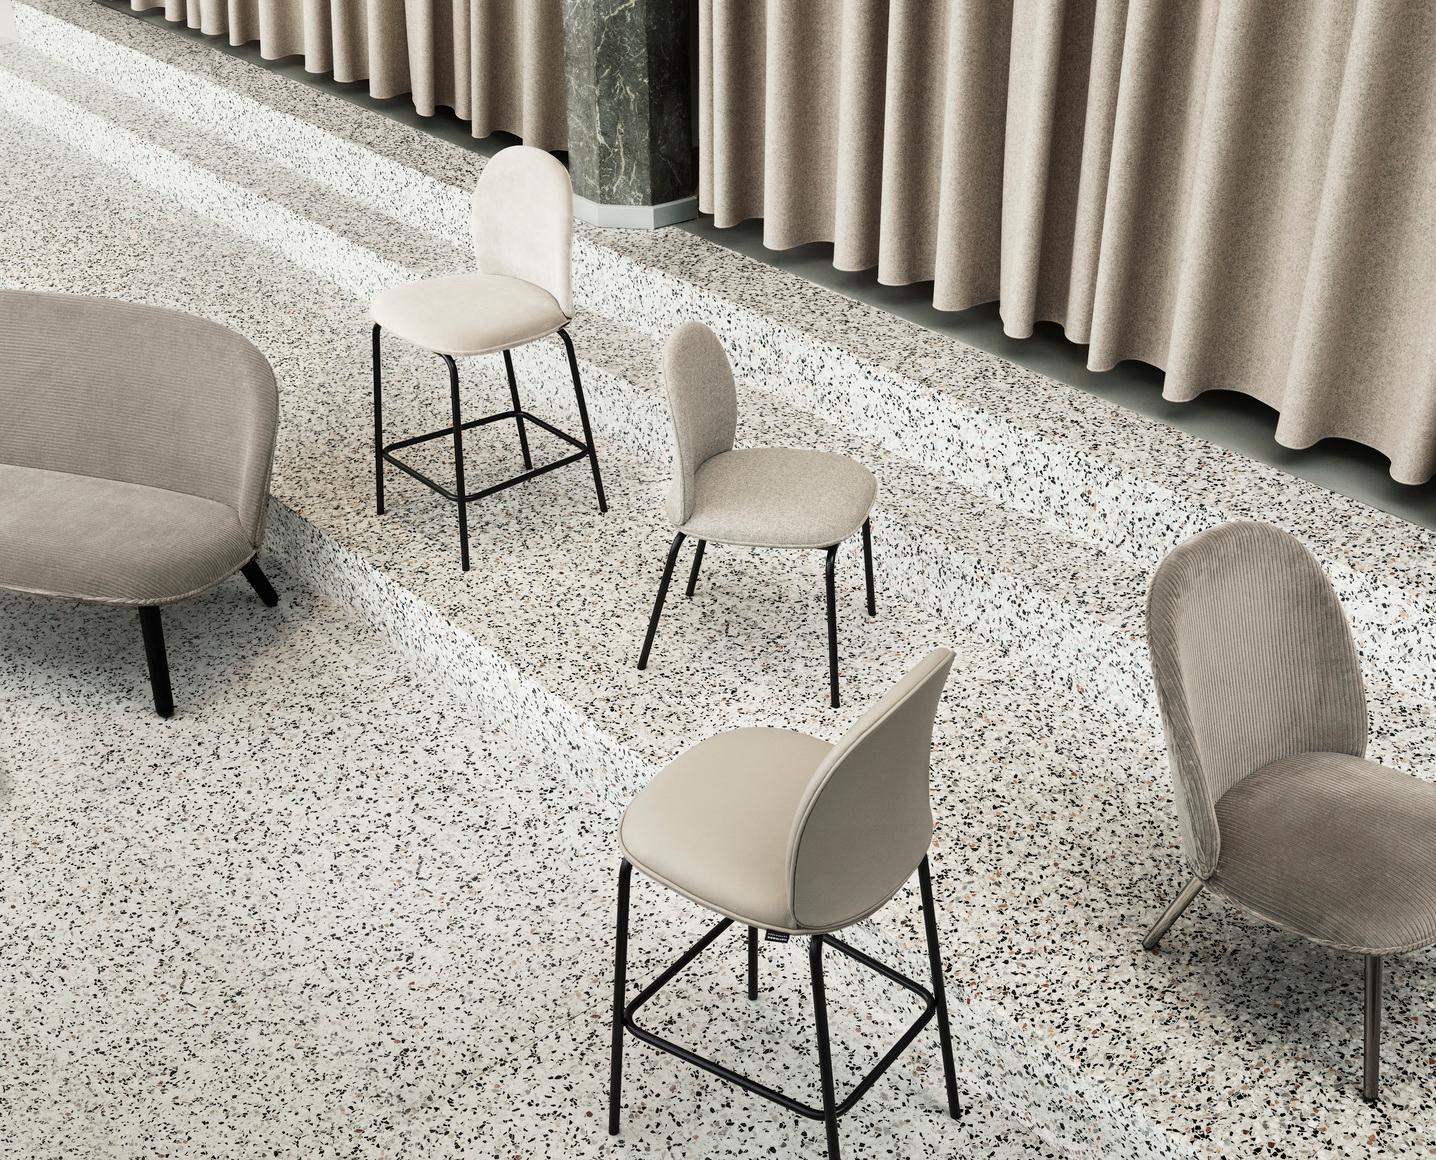 The back is constructed of molded PU foam on a base of molded veneer for flexibility and the highest possible sitting comfort. The seat is made in molded PU foam with a steel reinforcement. The legs are coned steel tube which makes the chair appear